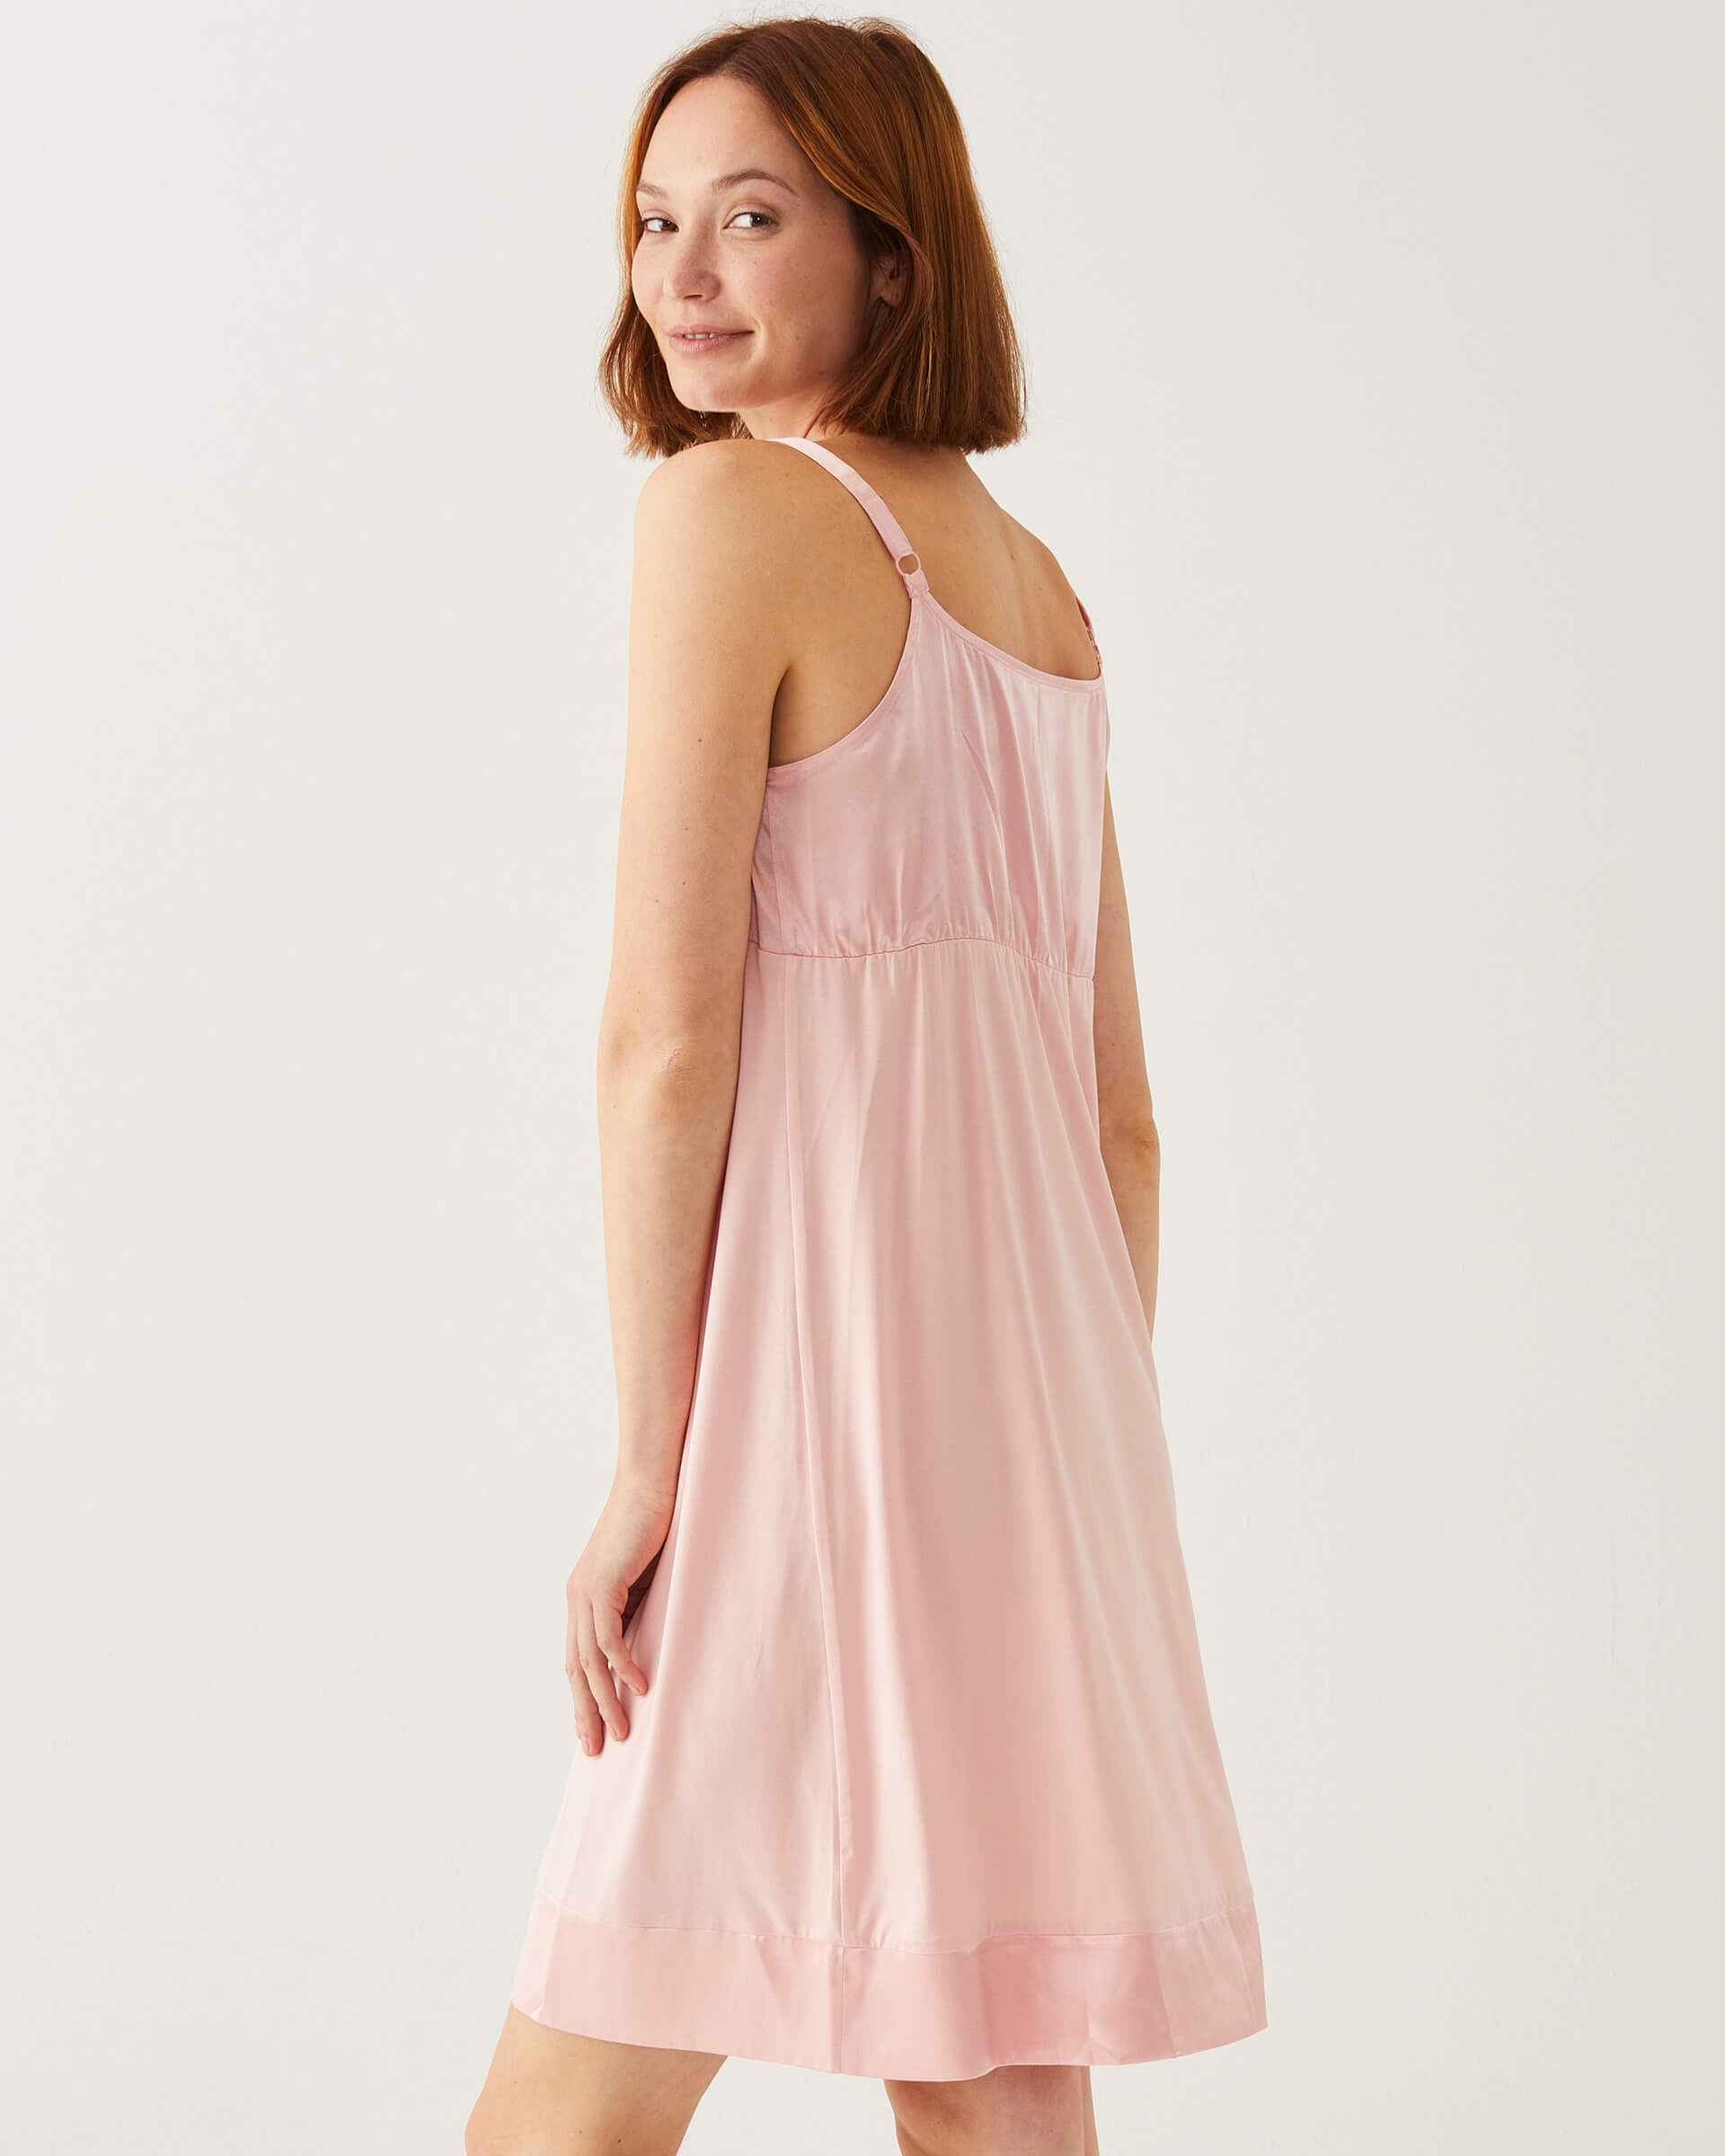 female wearing light pink satin pajama sleep dress looking over a shoulder on a white background